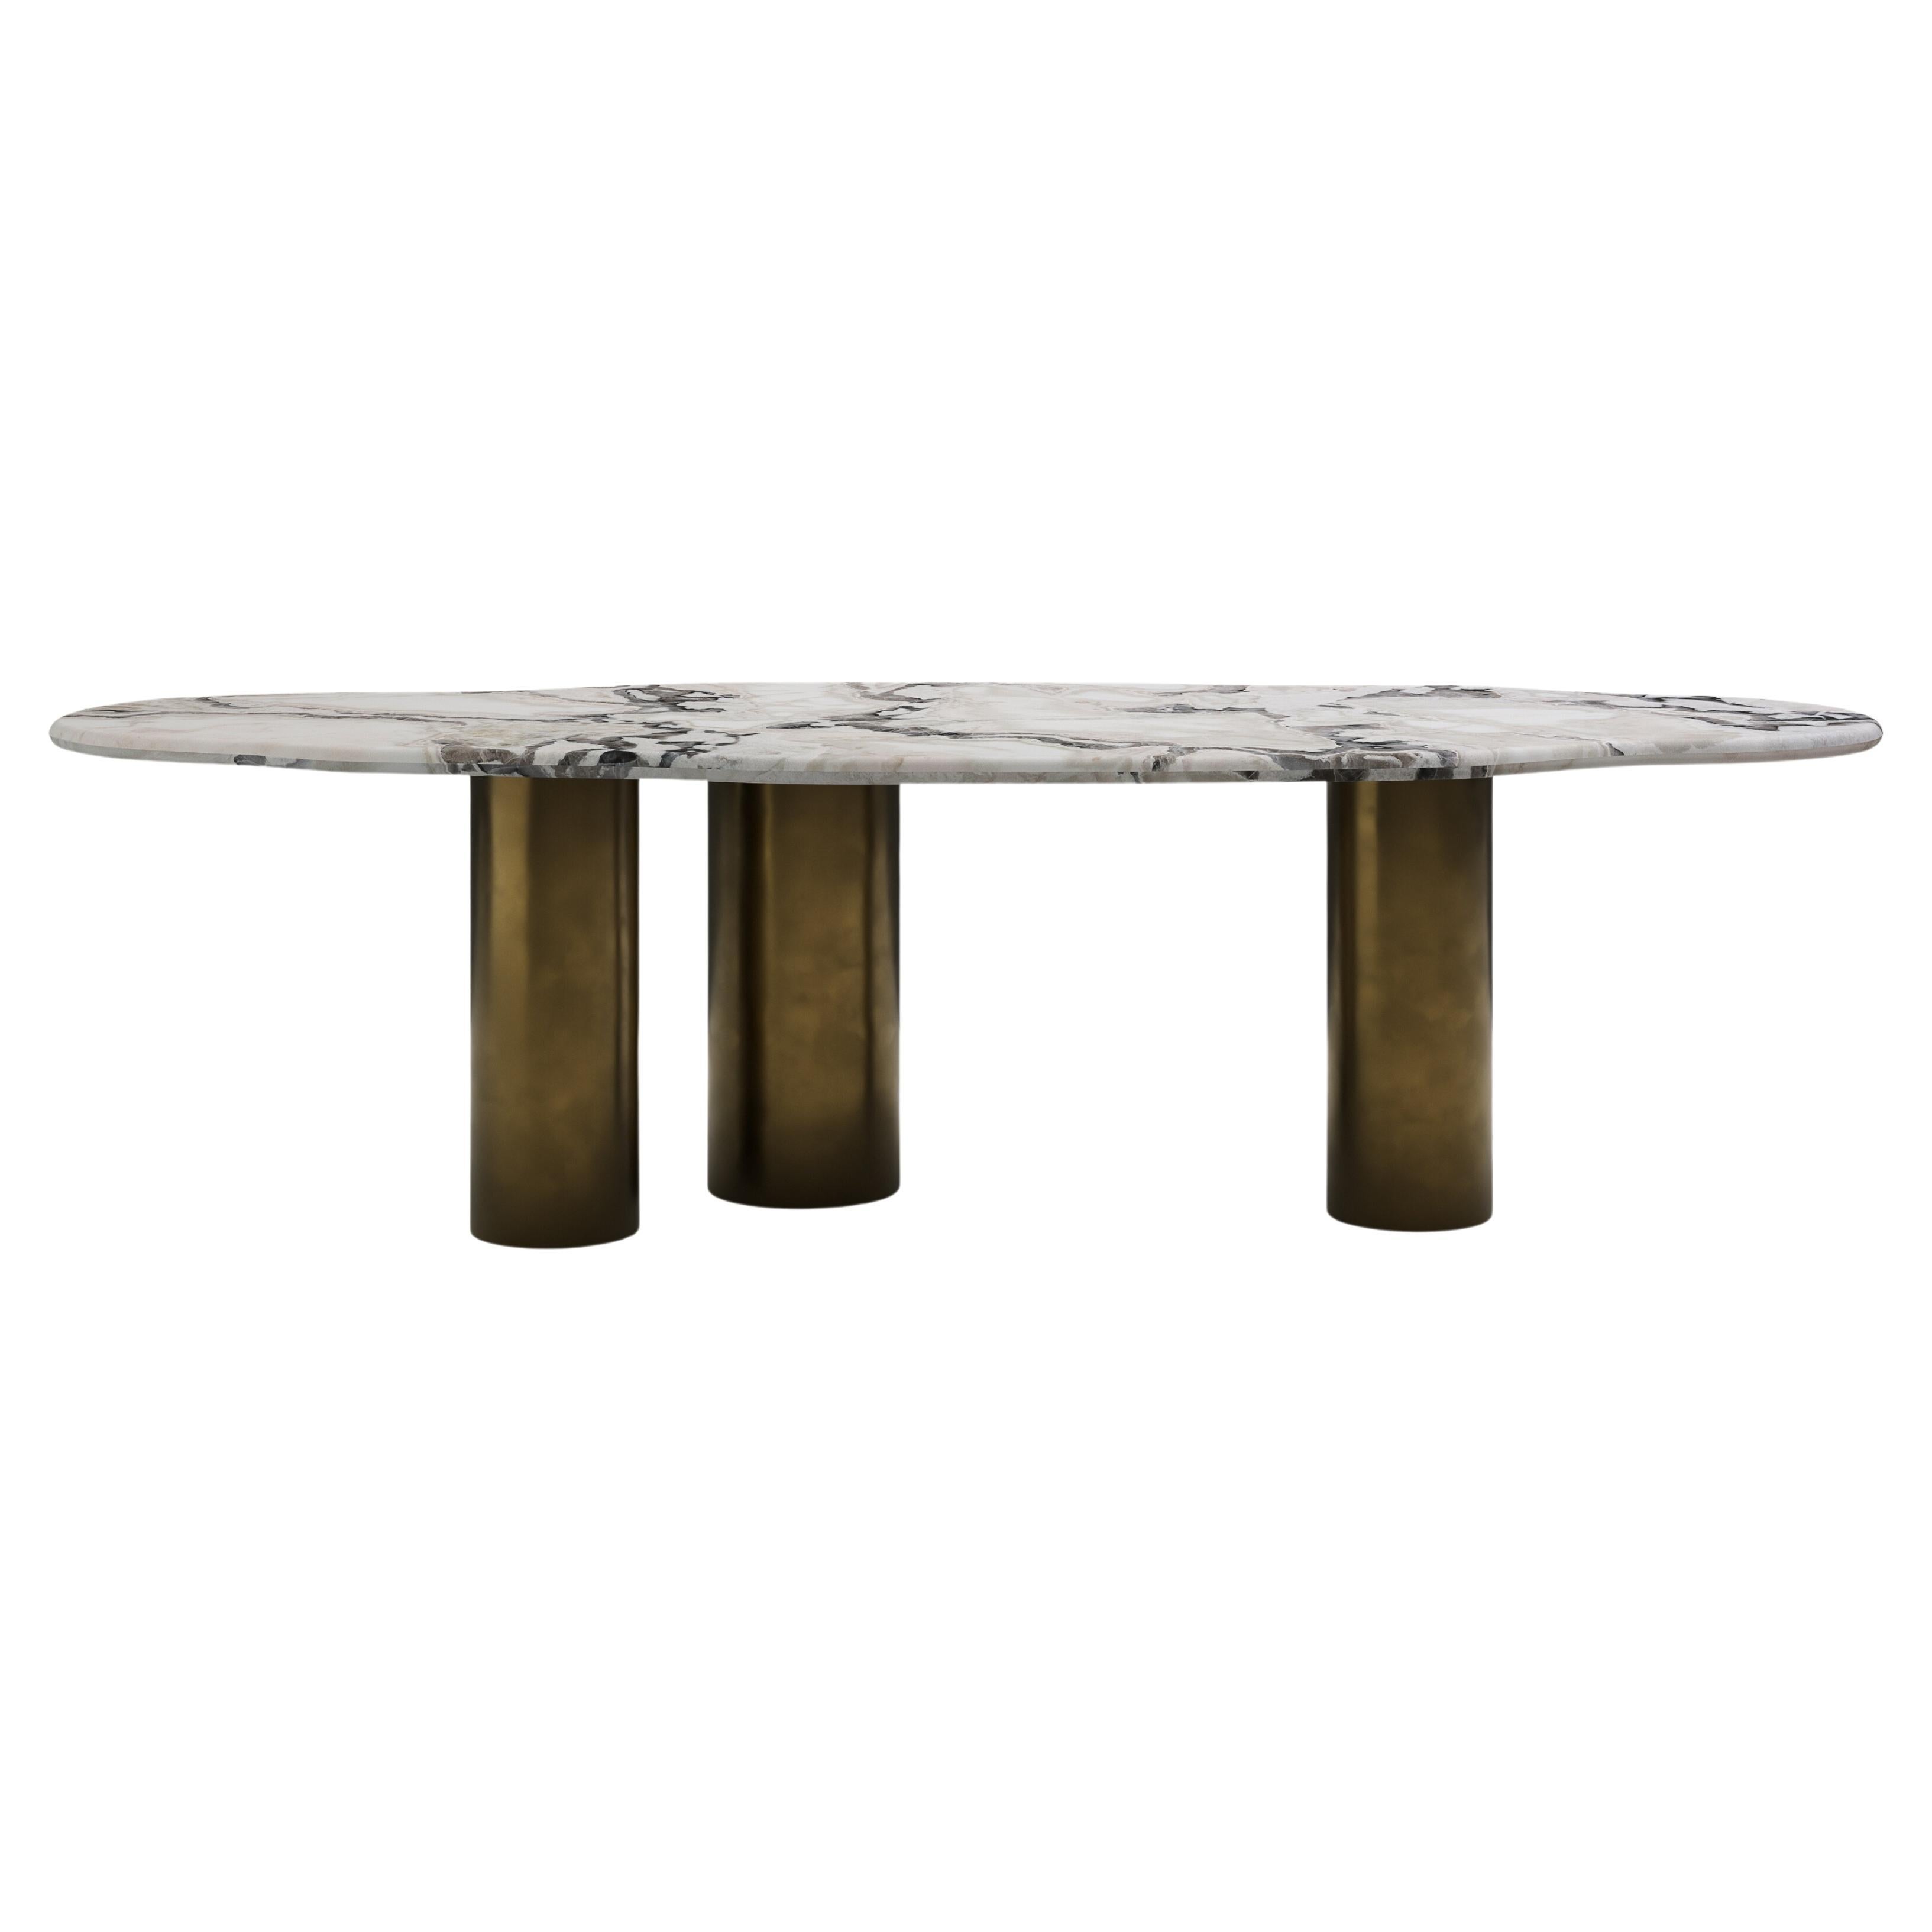 FORM(LA) Lago Freeform Dining Table 108”L x 48”W x 30”H Oyster Marble & Bronze For Sale